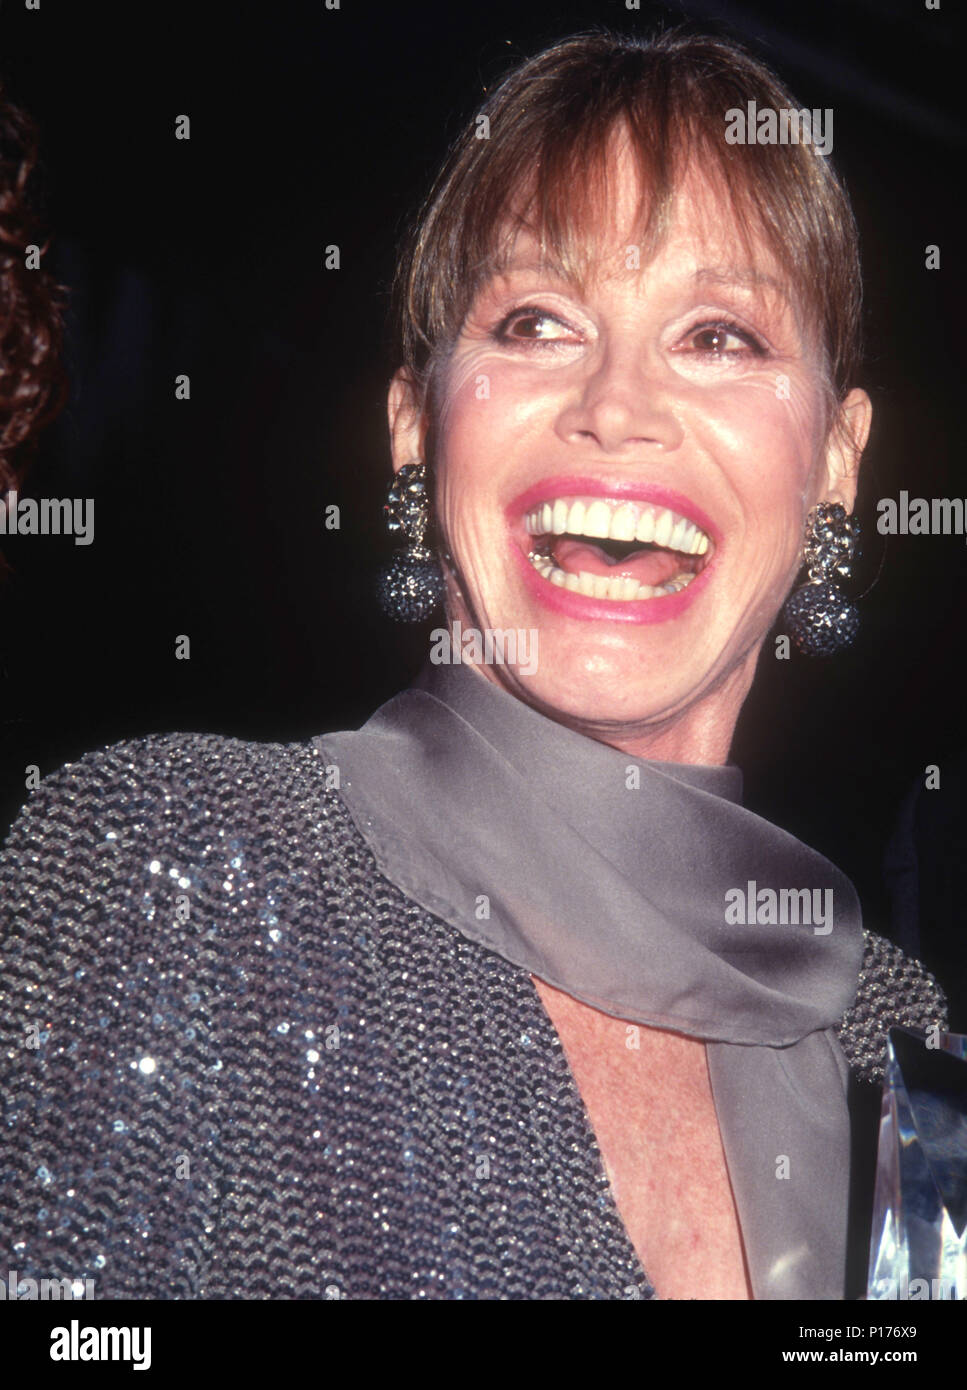 BEVERLY HILLS, CA - OCTOBER 04: Actress Mary Tyler Moore attends the Los Angeles Chapter Juvenile Diabetes Research Foundation International Presents the First Annual Promise Ball on October 4, 1991 at the Beverly Hilton Hotel in Beverly Hills, California. Photo by Barry King/Alamy Stock Photo Stock Photo